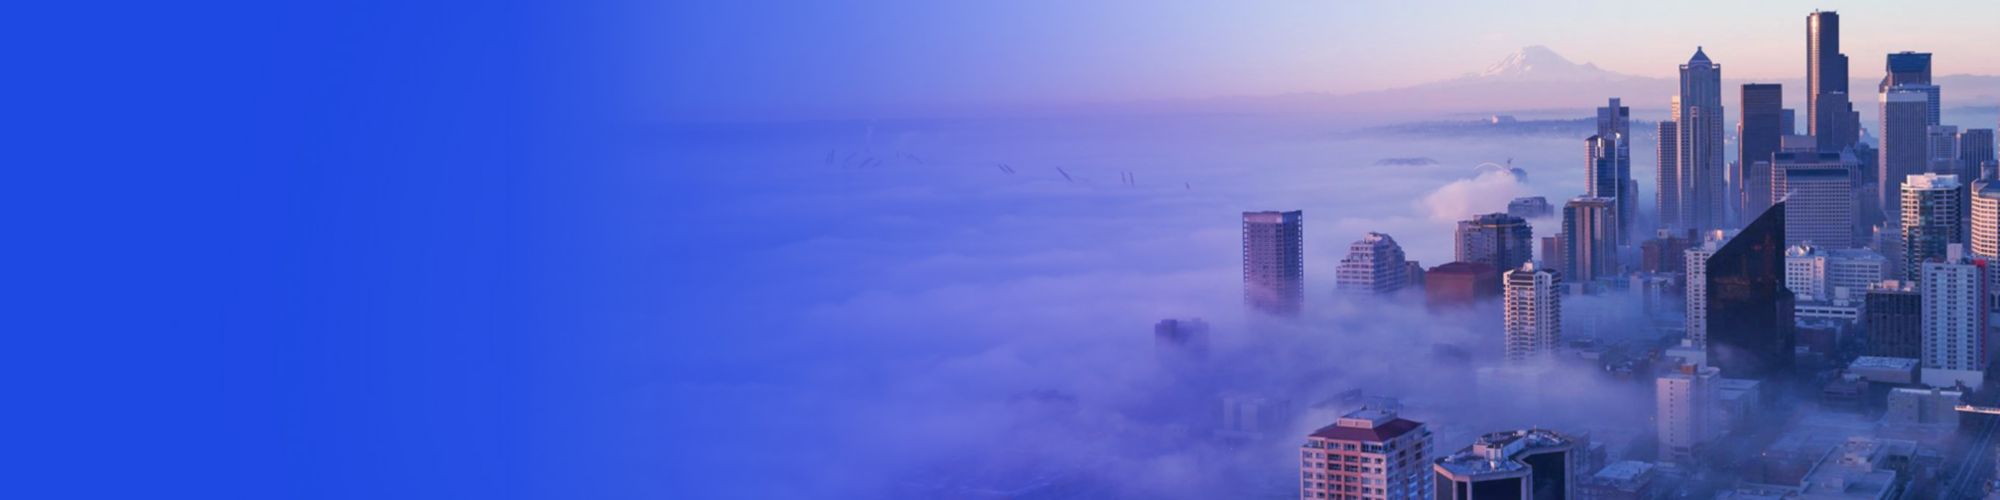 Aerial view of skyscrapers in the clouds